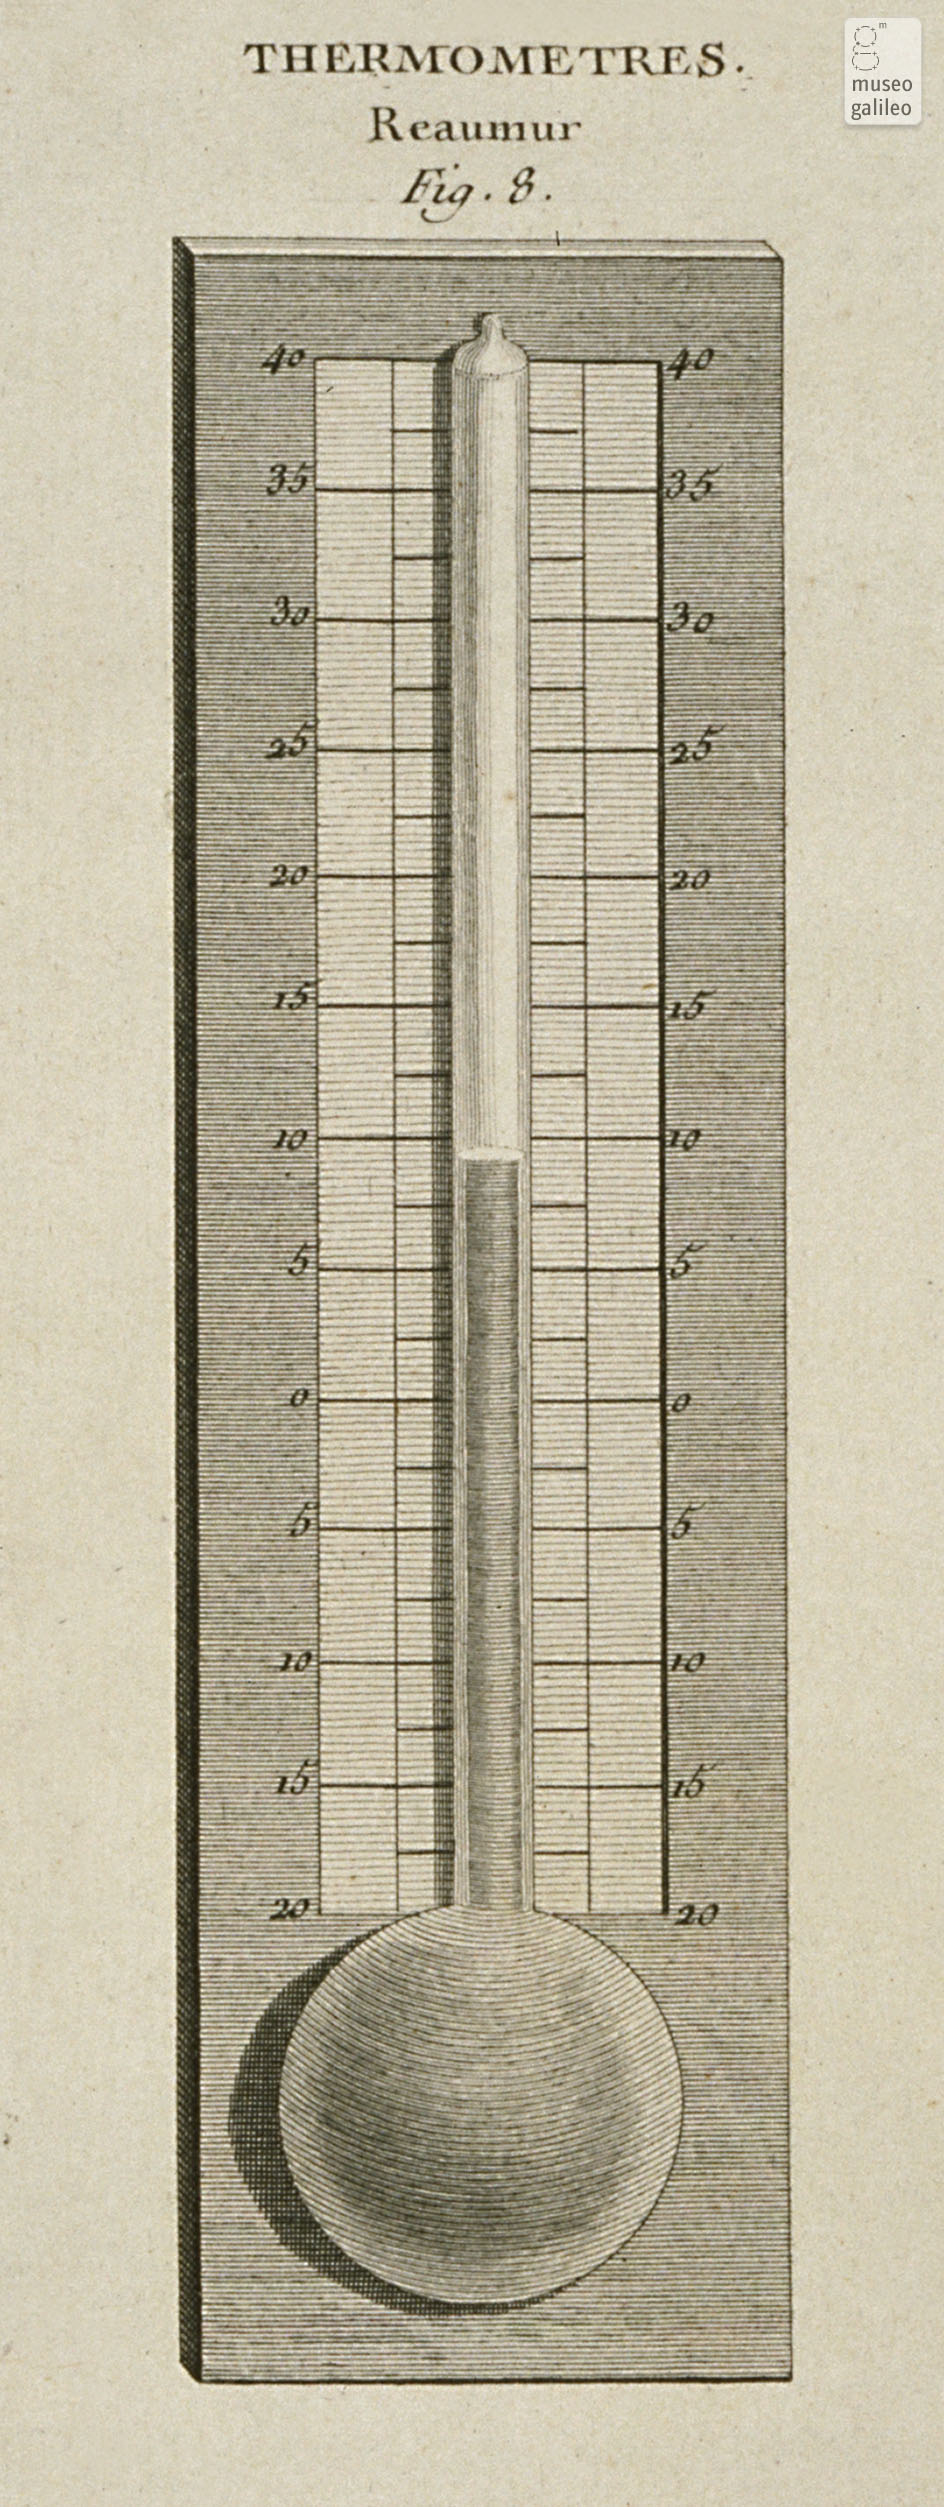 Réaumur thermometric scale